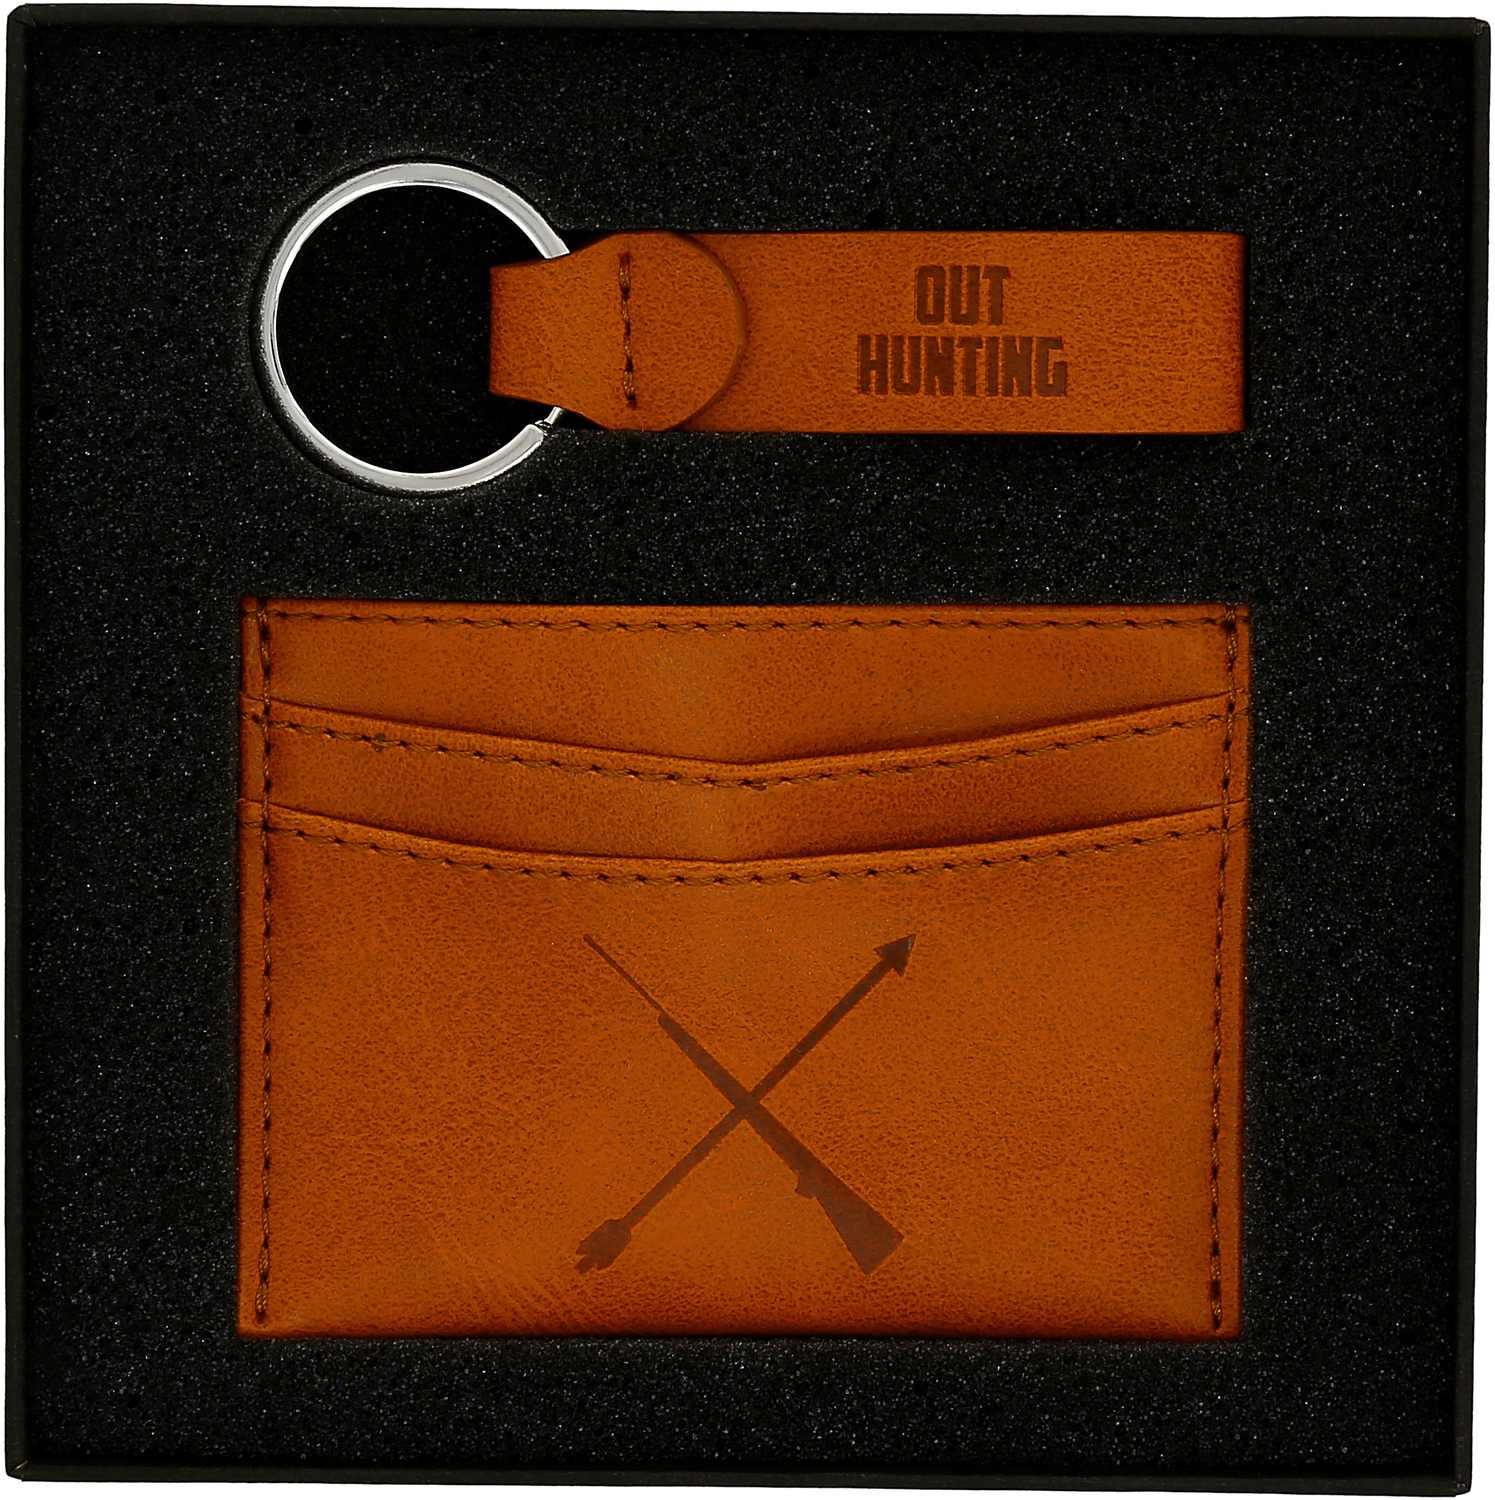 Hunting by Man Out - Hunting - PU Leather Keyring & Wallet Set